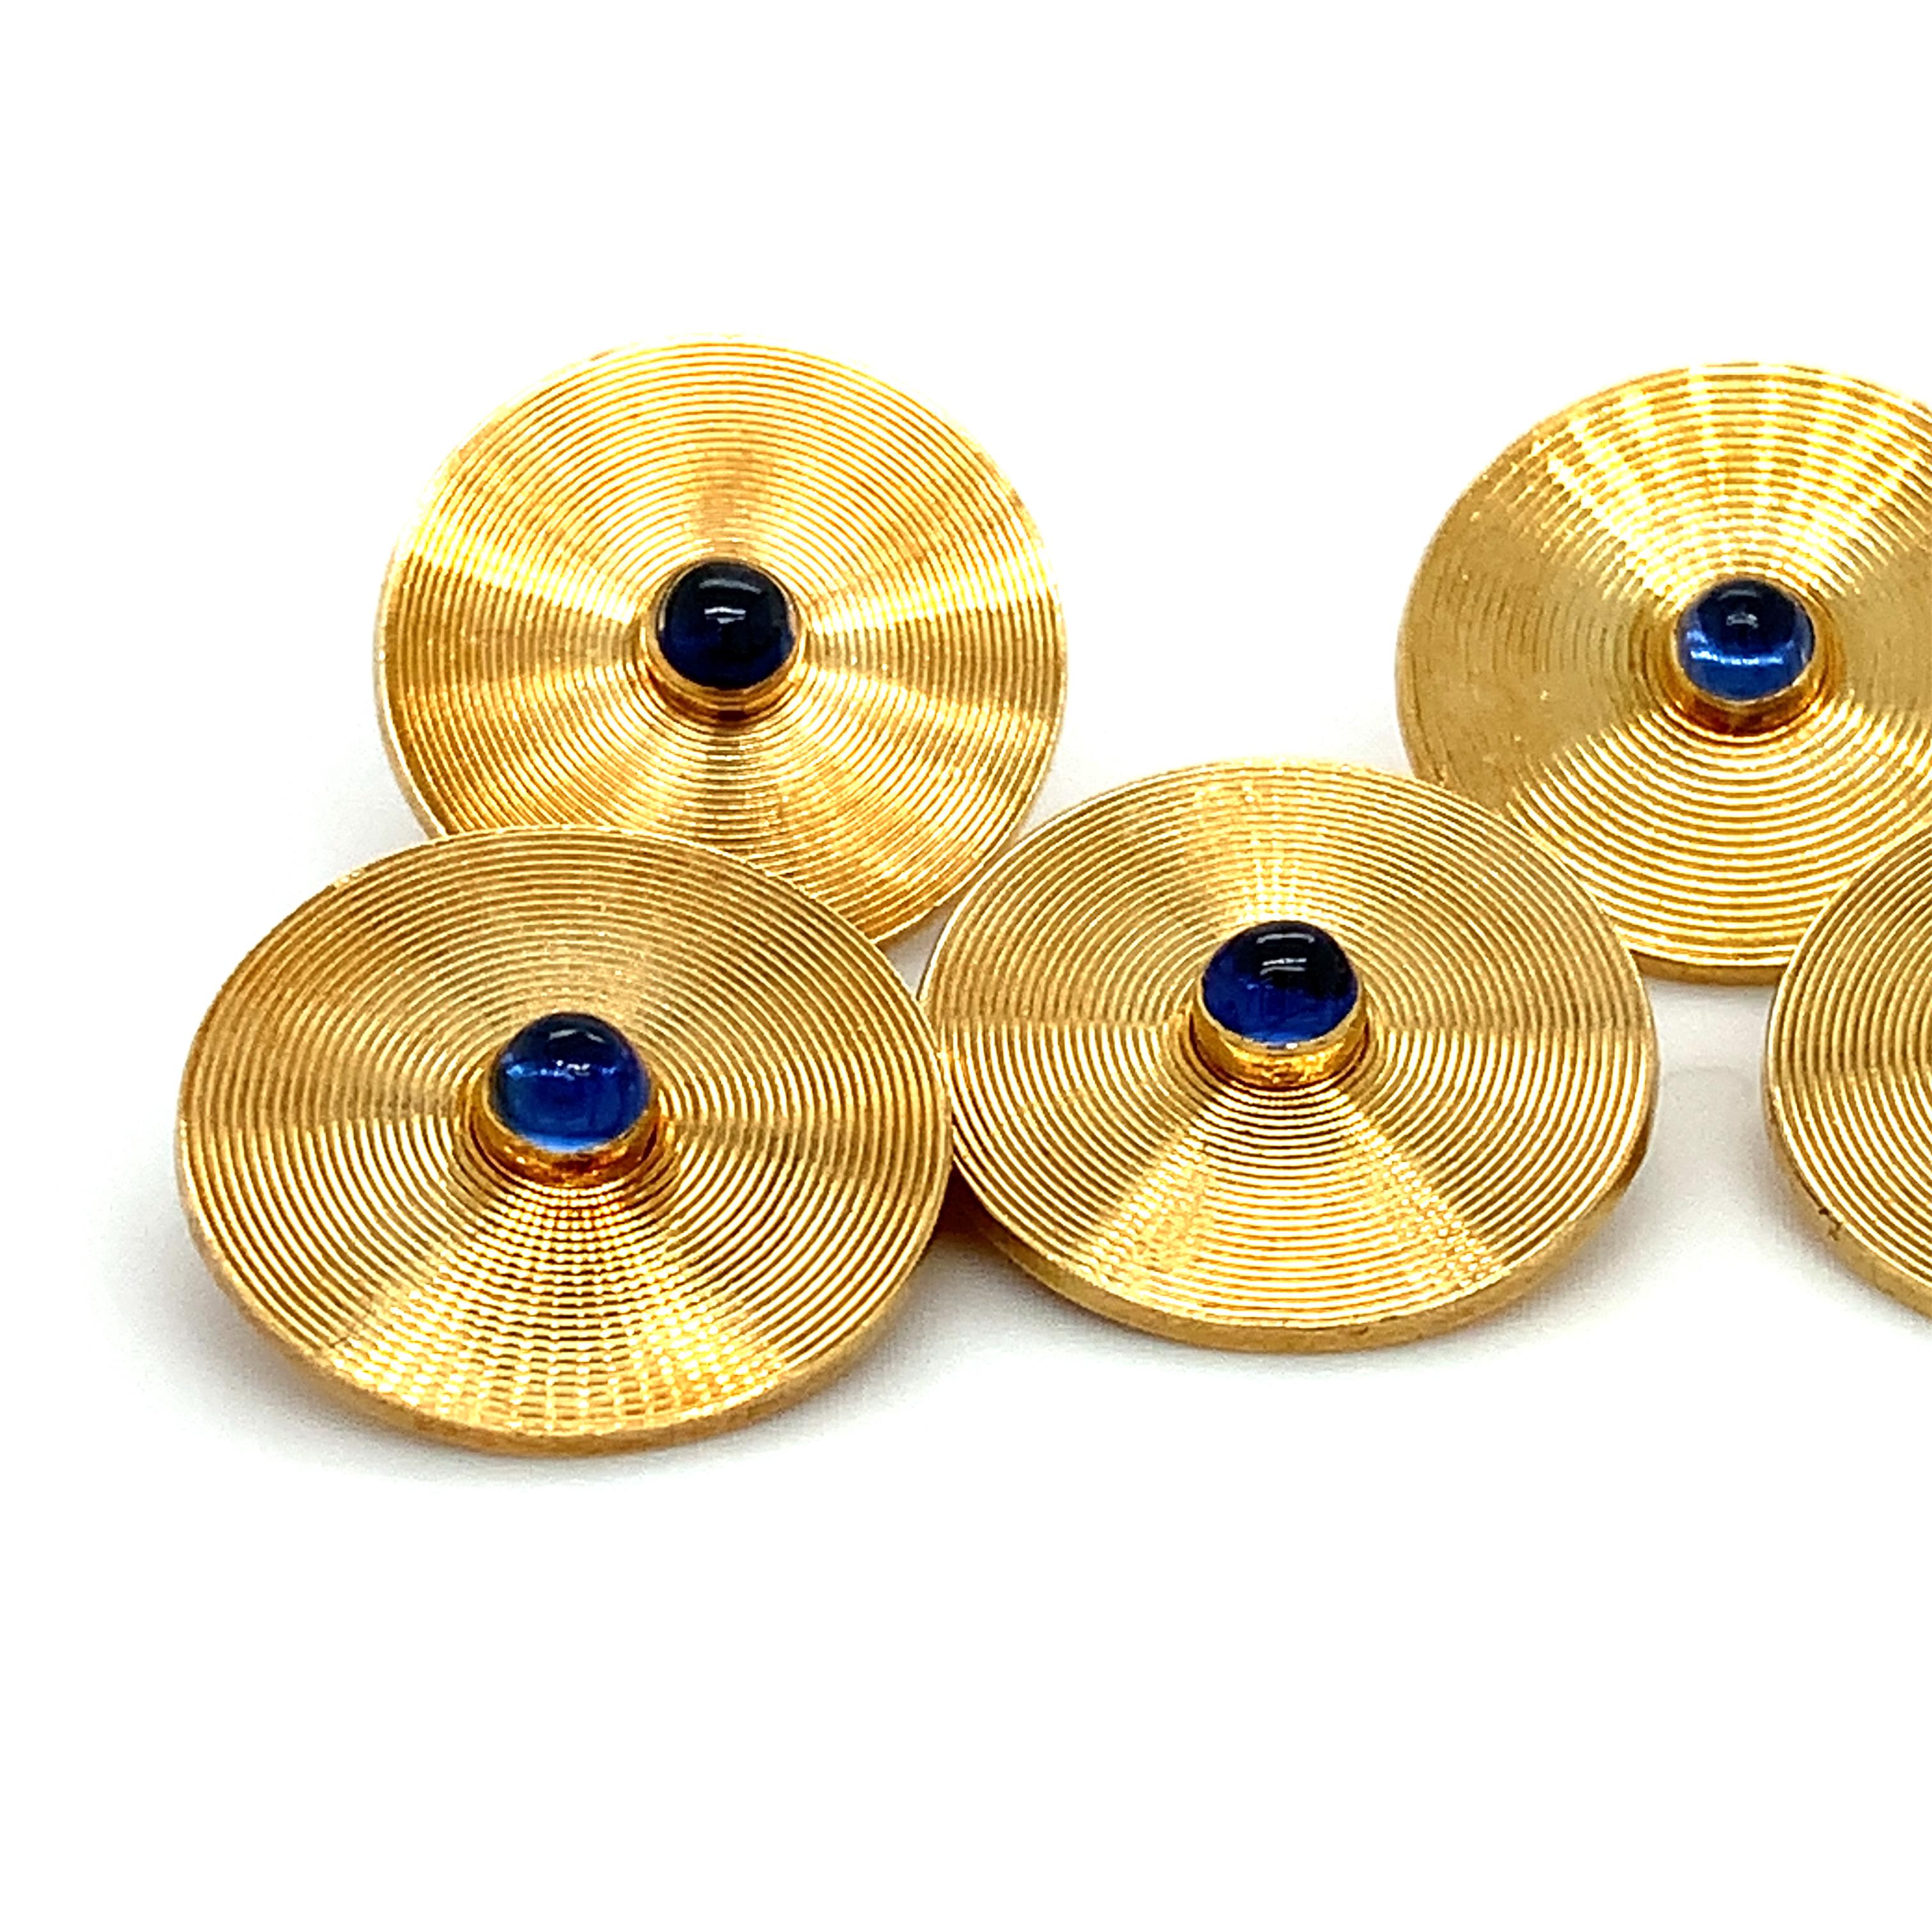 The most beautiful and elegant gentlemen's Cartier sapphire cabochon dress set and cufflinks round shaped with ribbed spheres design in 18ct yellow gold.
Each set with sapphire cabochon gemstone round shaped and polished.
Period: Circa